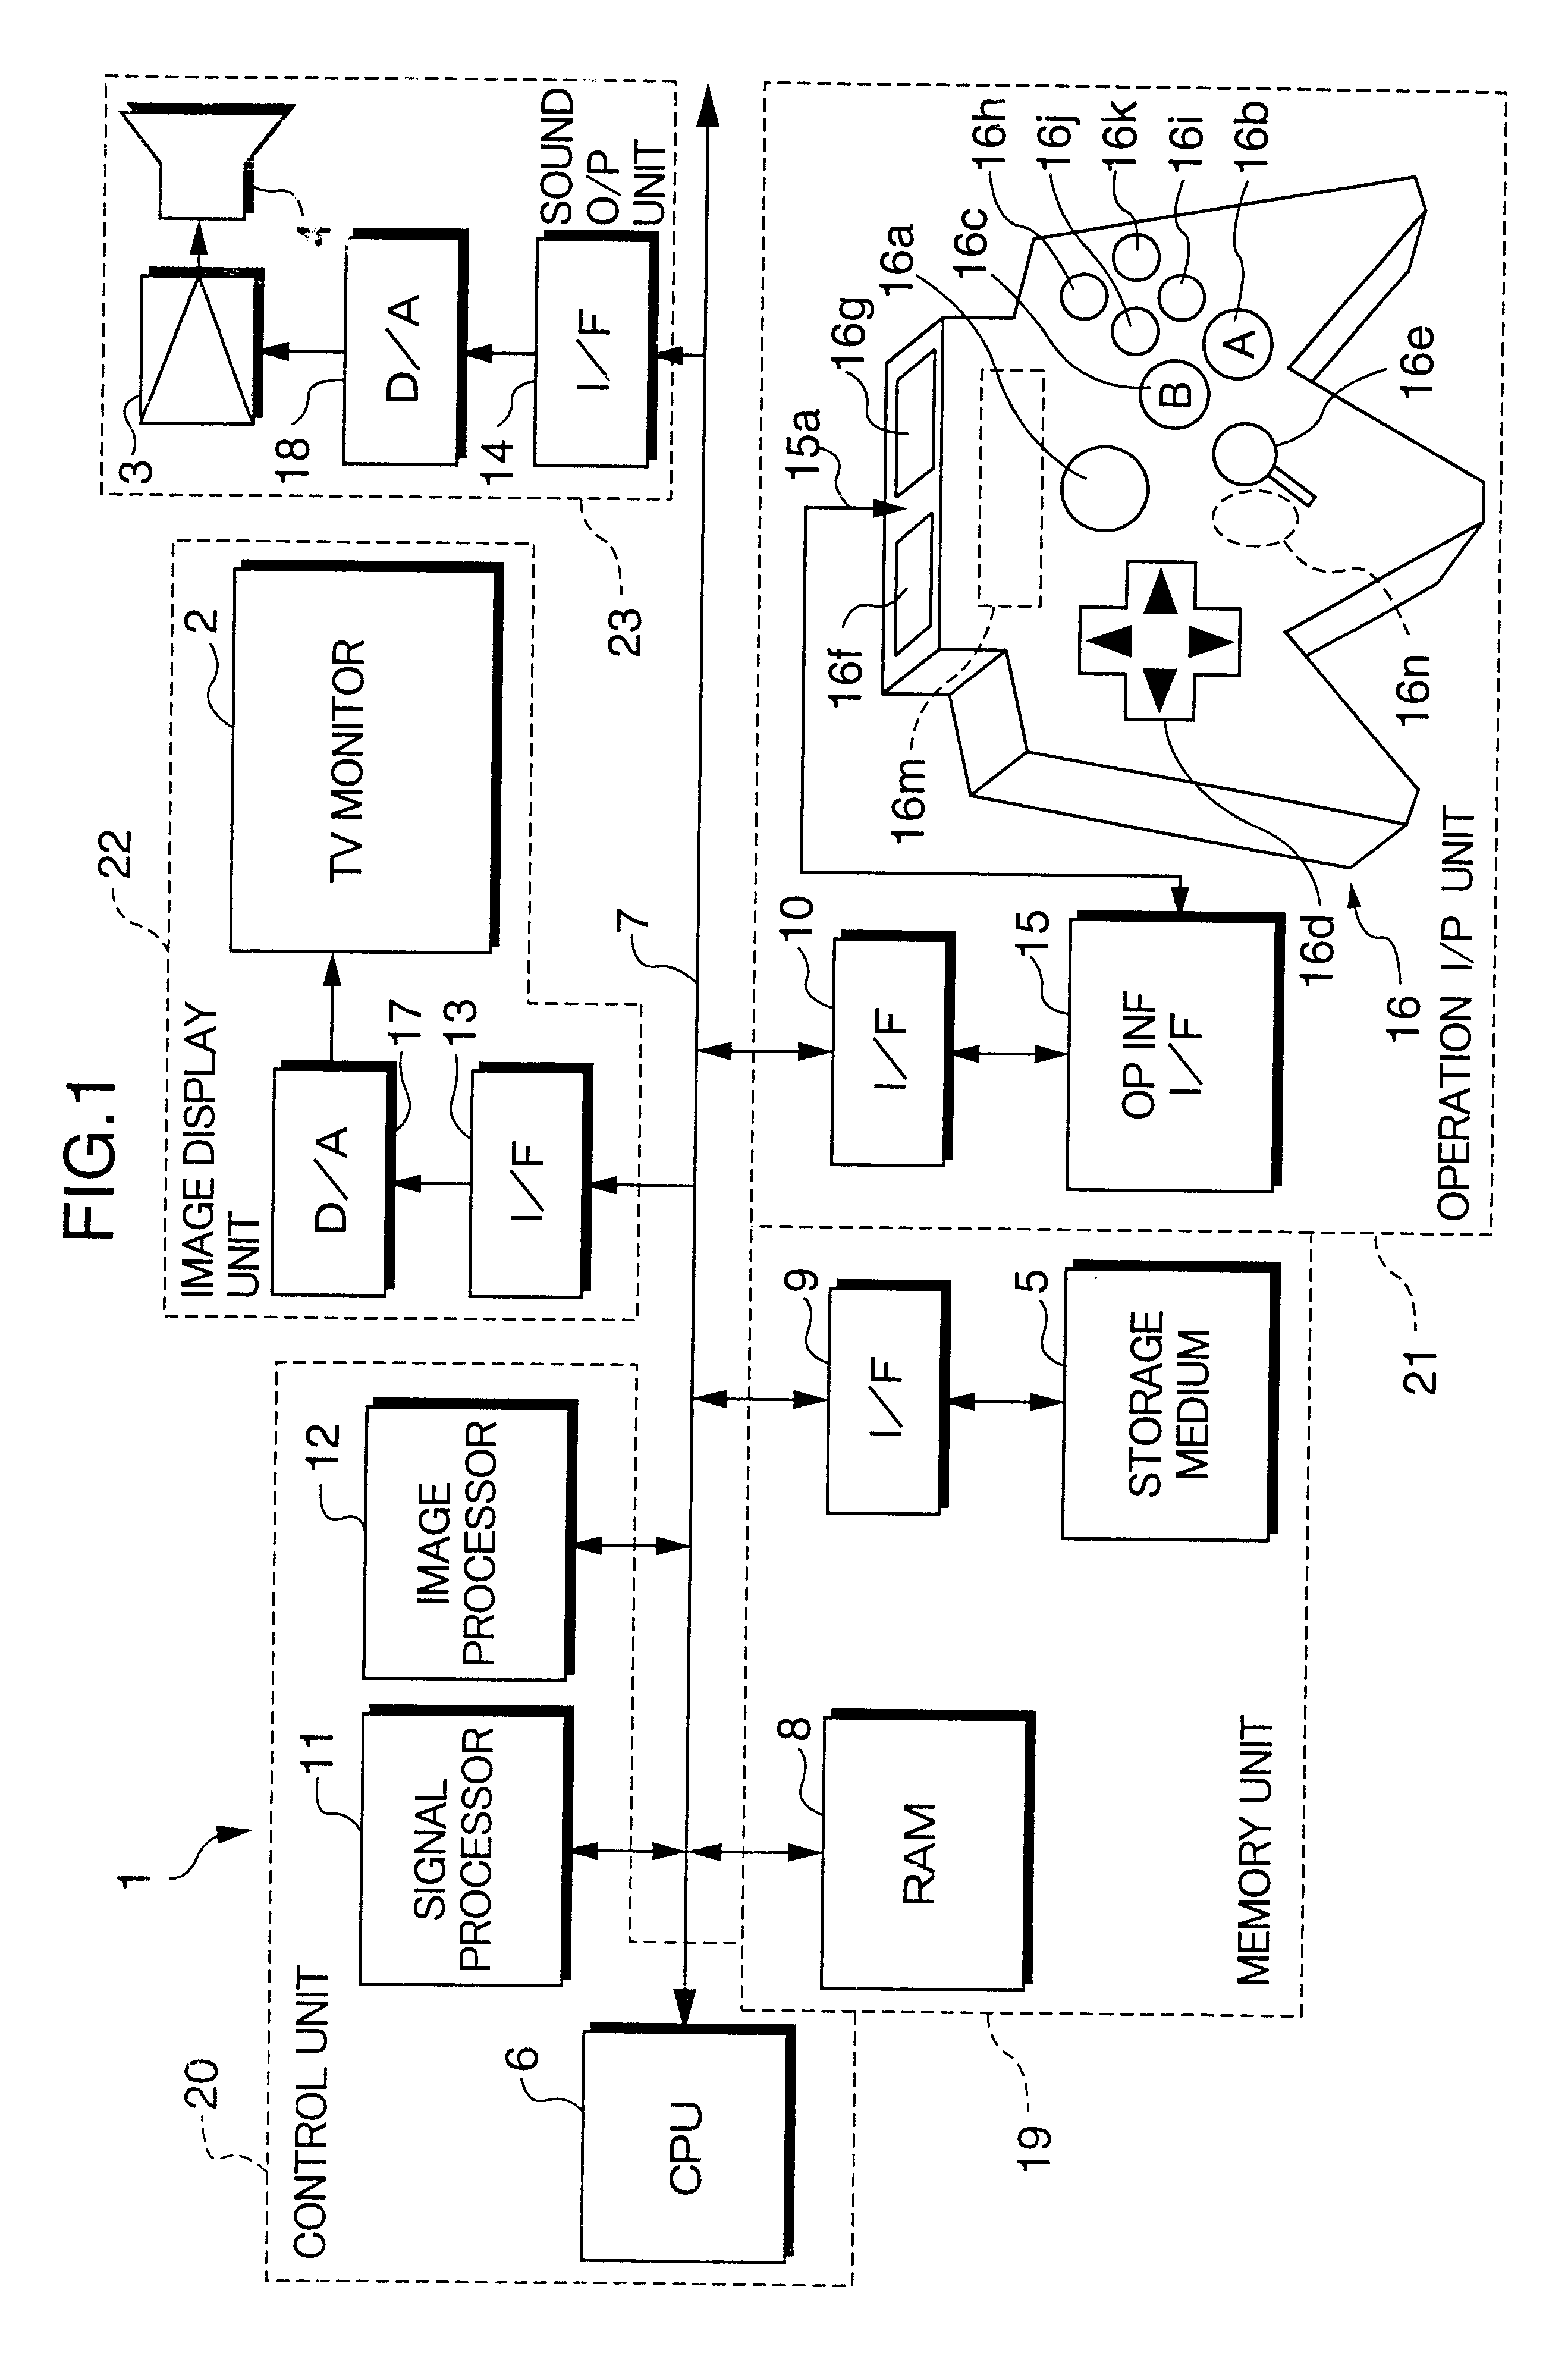 Image generating device, an image generating method, a readable storage medium storing an image generating program and a video game system